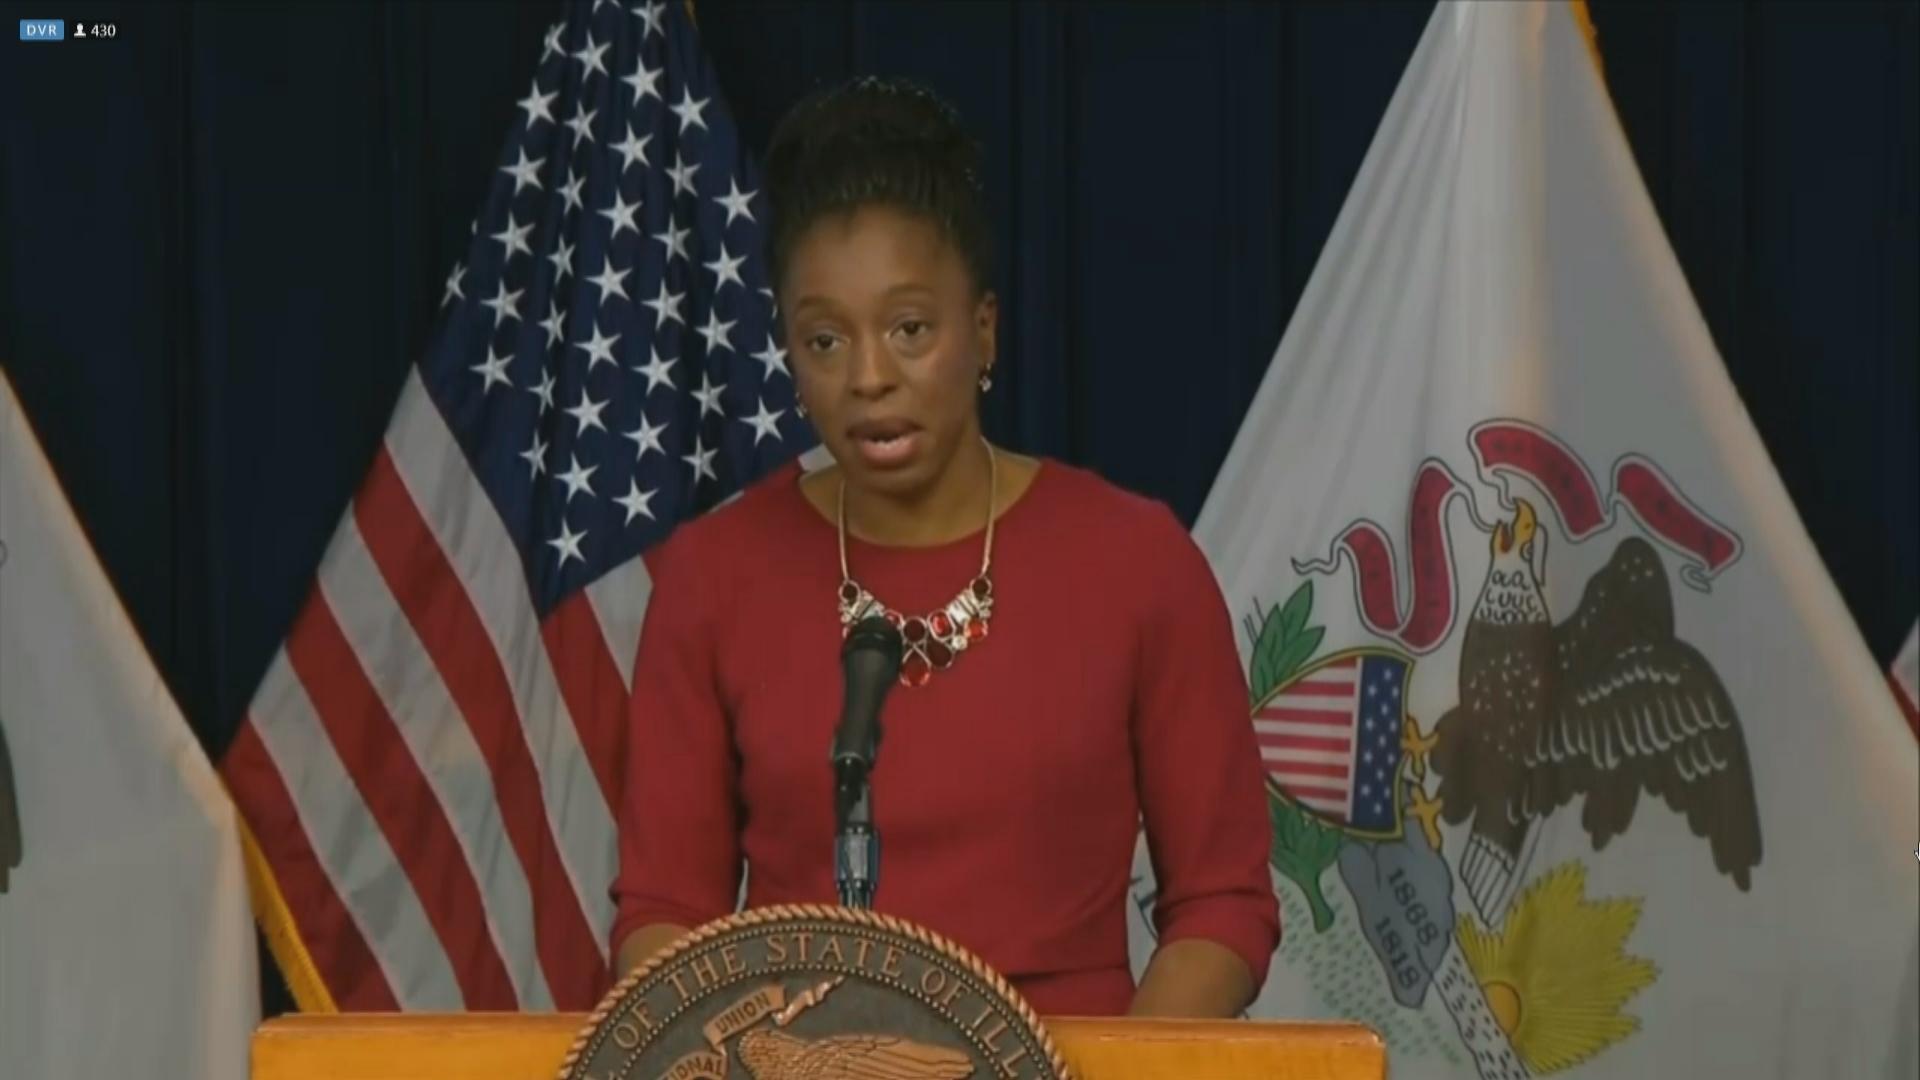 Illinois Department of Public Health Director Dr. Ngozi Ezike speaks Wednesday, Dec. 9, 2020 during the state’s daily COVID-19 press briefing. (WTTW News)